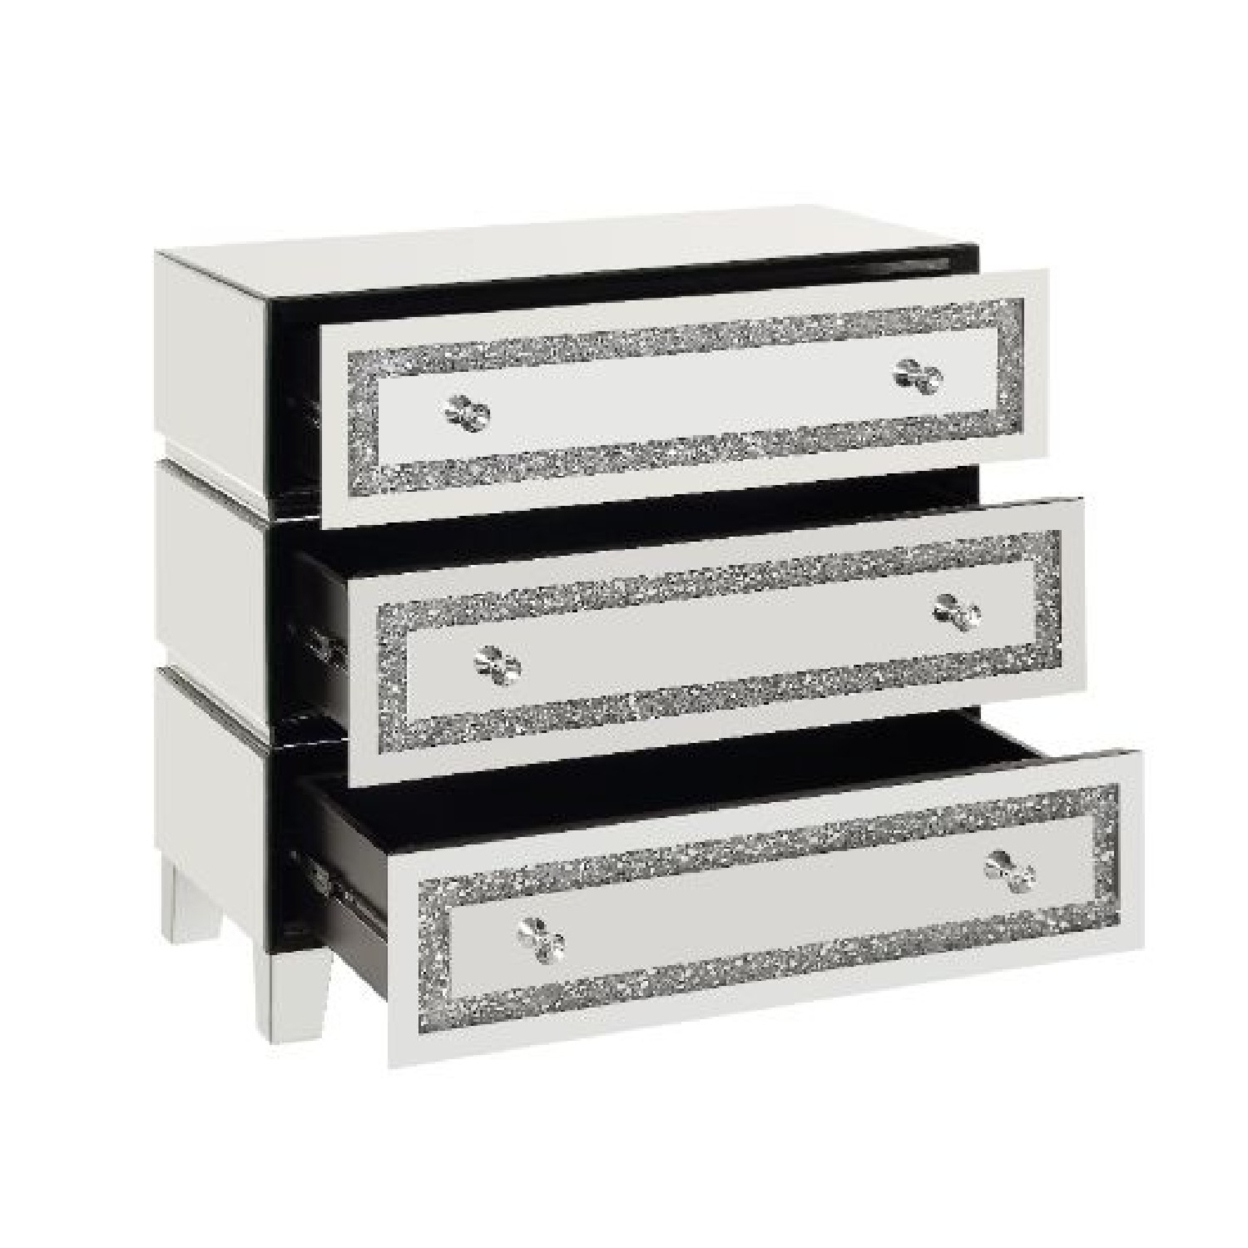 Storage Cabinet With 3 Drawers And Faux Diamond Inlays, Silver- Saltoro Sherpi